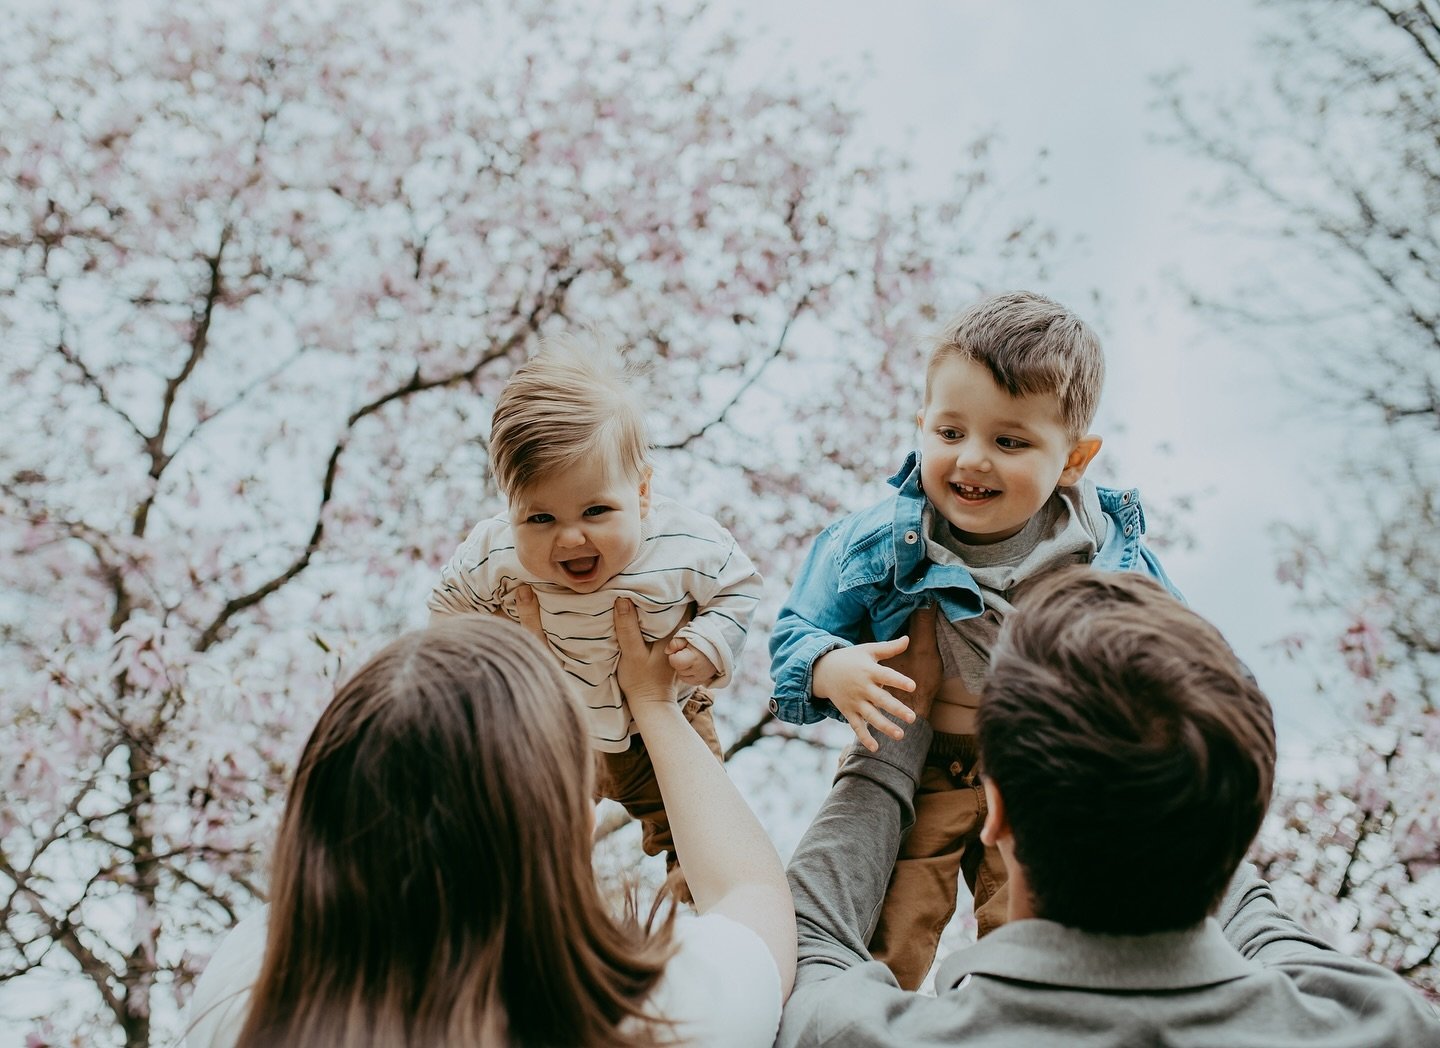 I had so much fun photographing all the lovely families who joined me for my Spring Minis this past weekend, including some who have been with me since the beginning. It&rsquo;s been a joy witnessing your children grow in front of my camera lens over